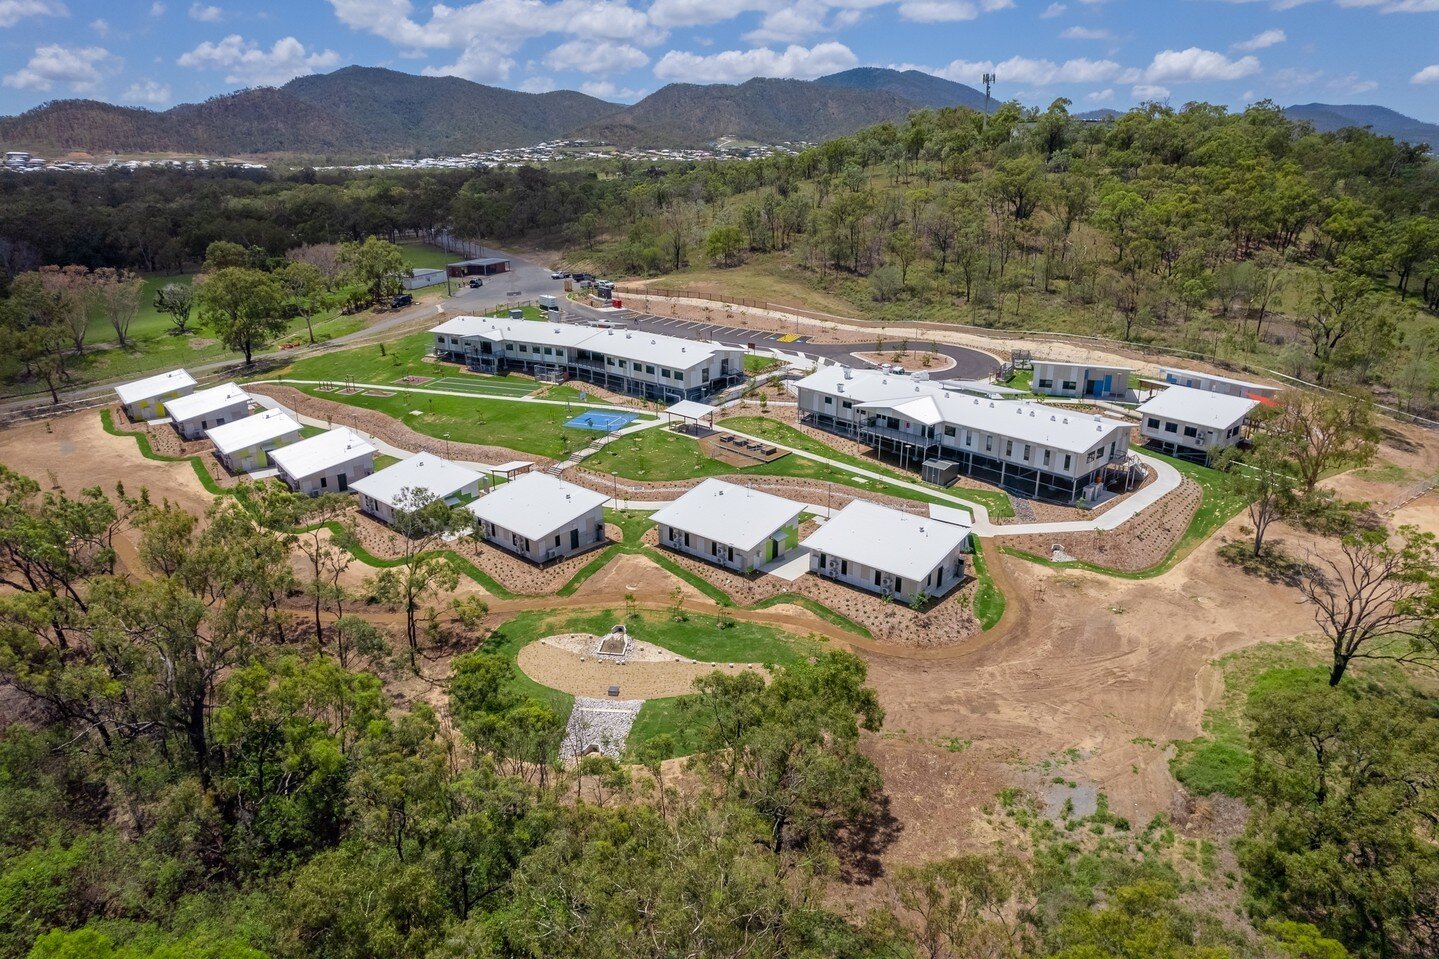 AWARD WINNING // We are pleased to share that MODE&rsquo;s project for the Rockhampton Rehab facility has won the regional master builders award for projects under $20 million. MODE worked with Woollam Construction throughout 2021 to realise the Rock